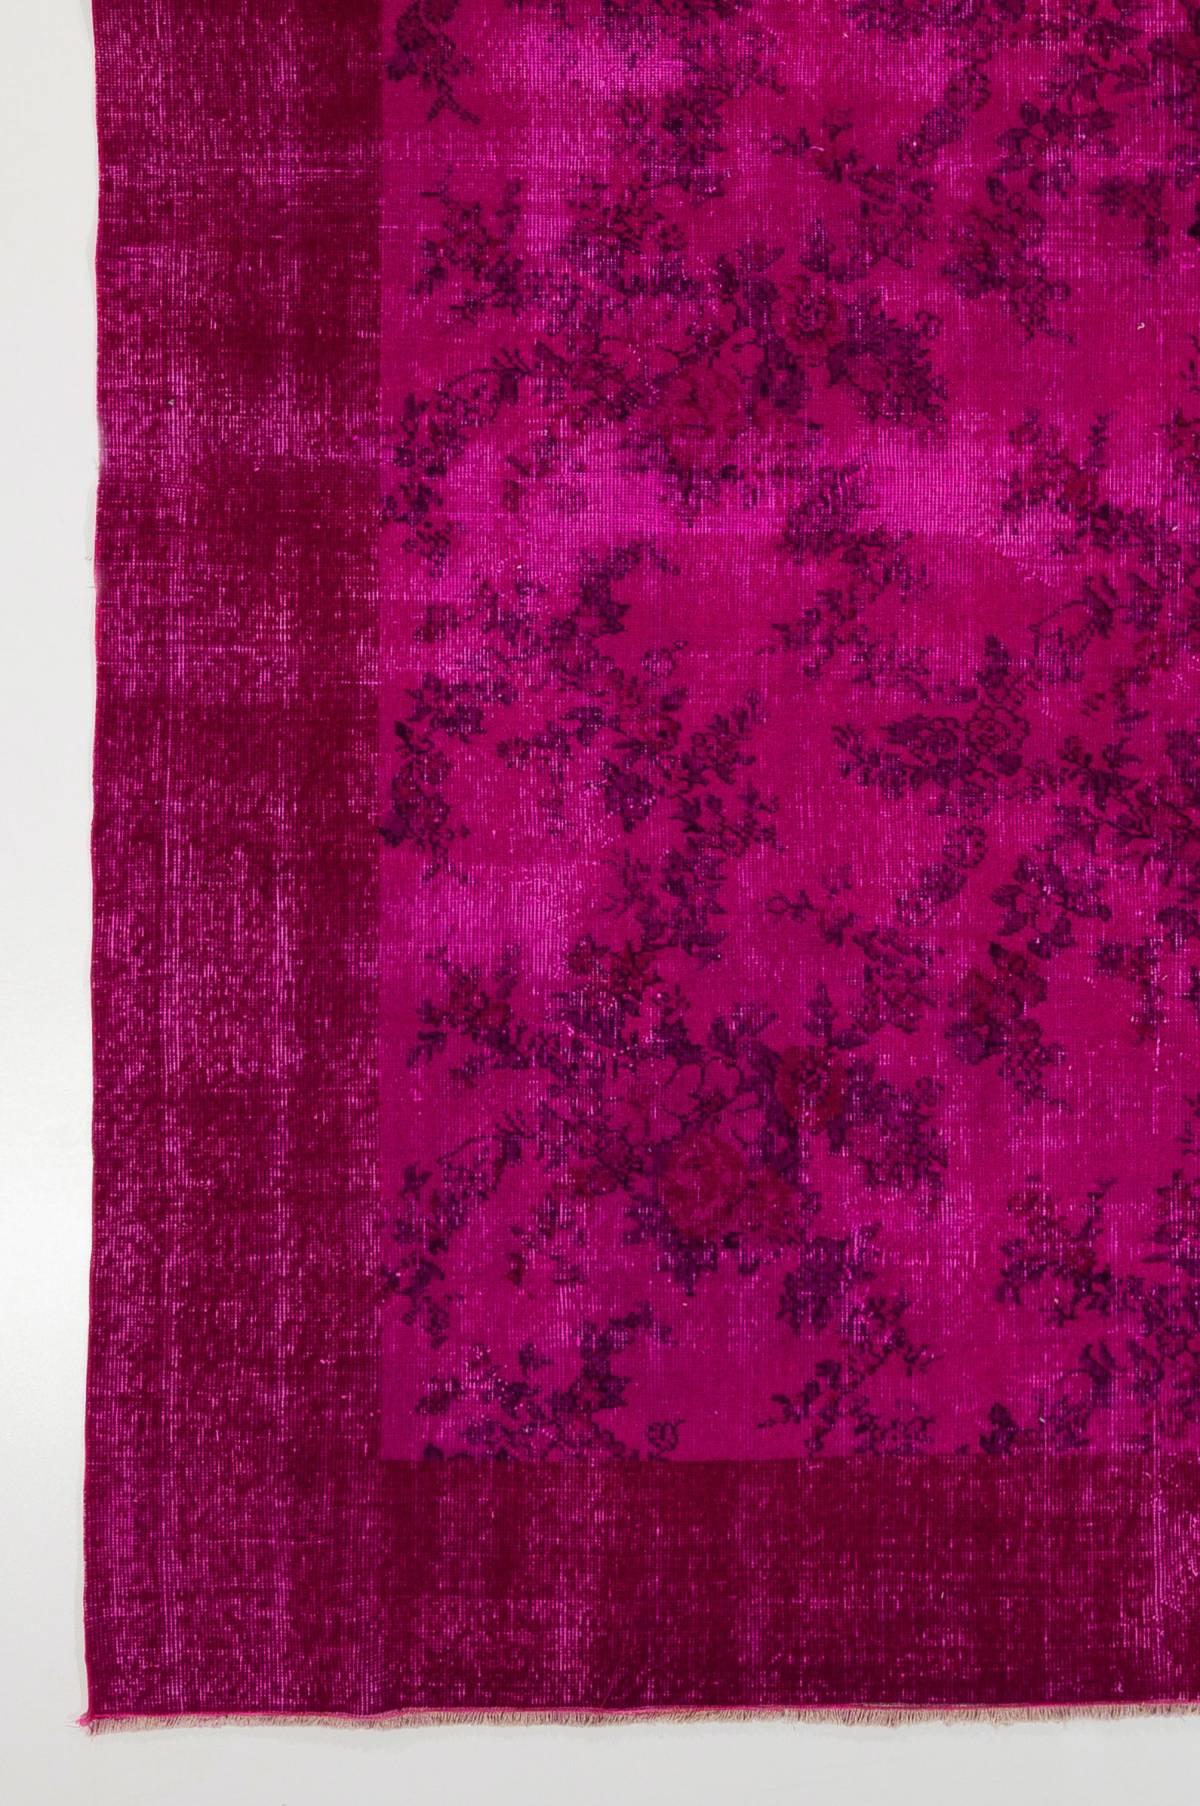 Hand-Woven Vintage Turkish Rug with Floral Design Re-Dyed in Fuschia Pink Color